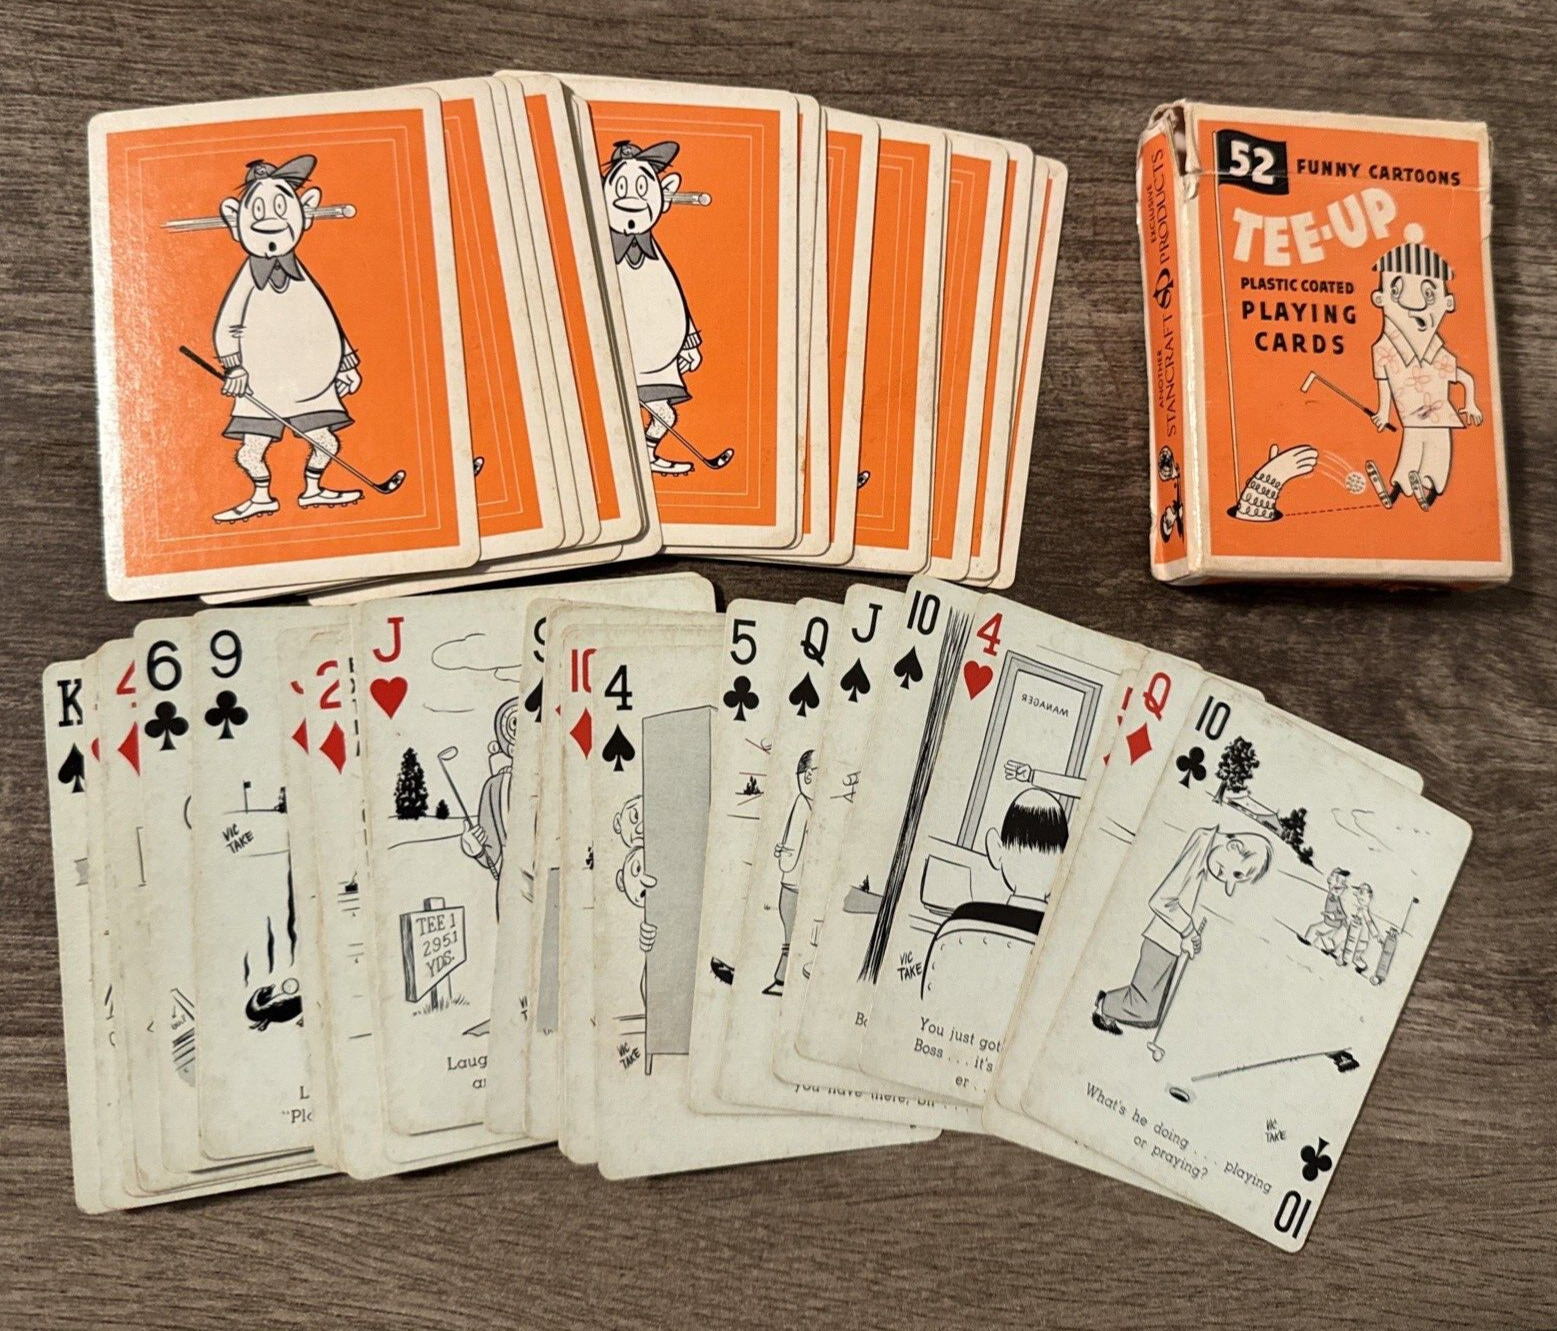 Vintage Tee-Up Playing Cards 52 Funny Cartoon Golfing Golf by Creative Co